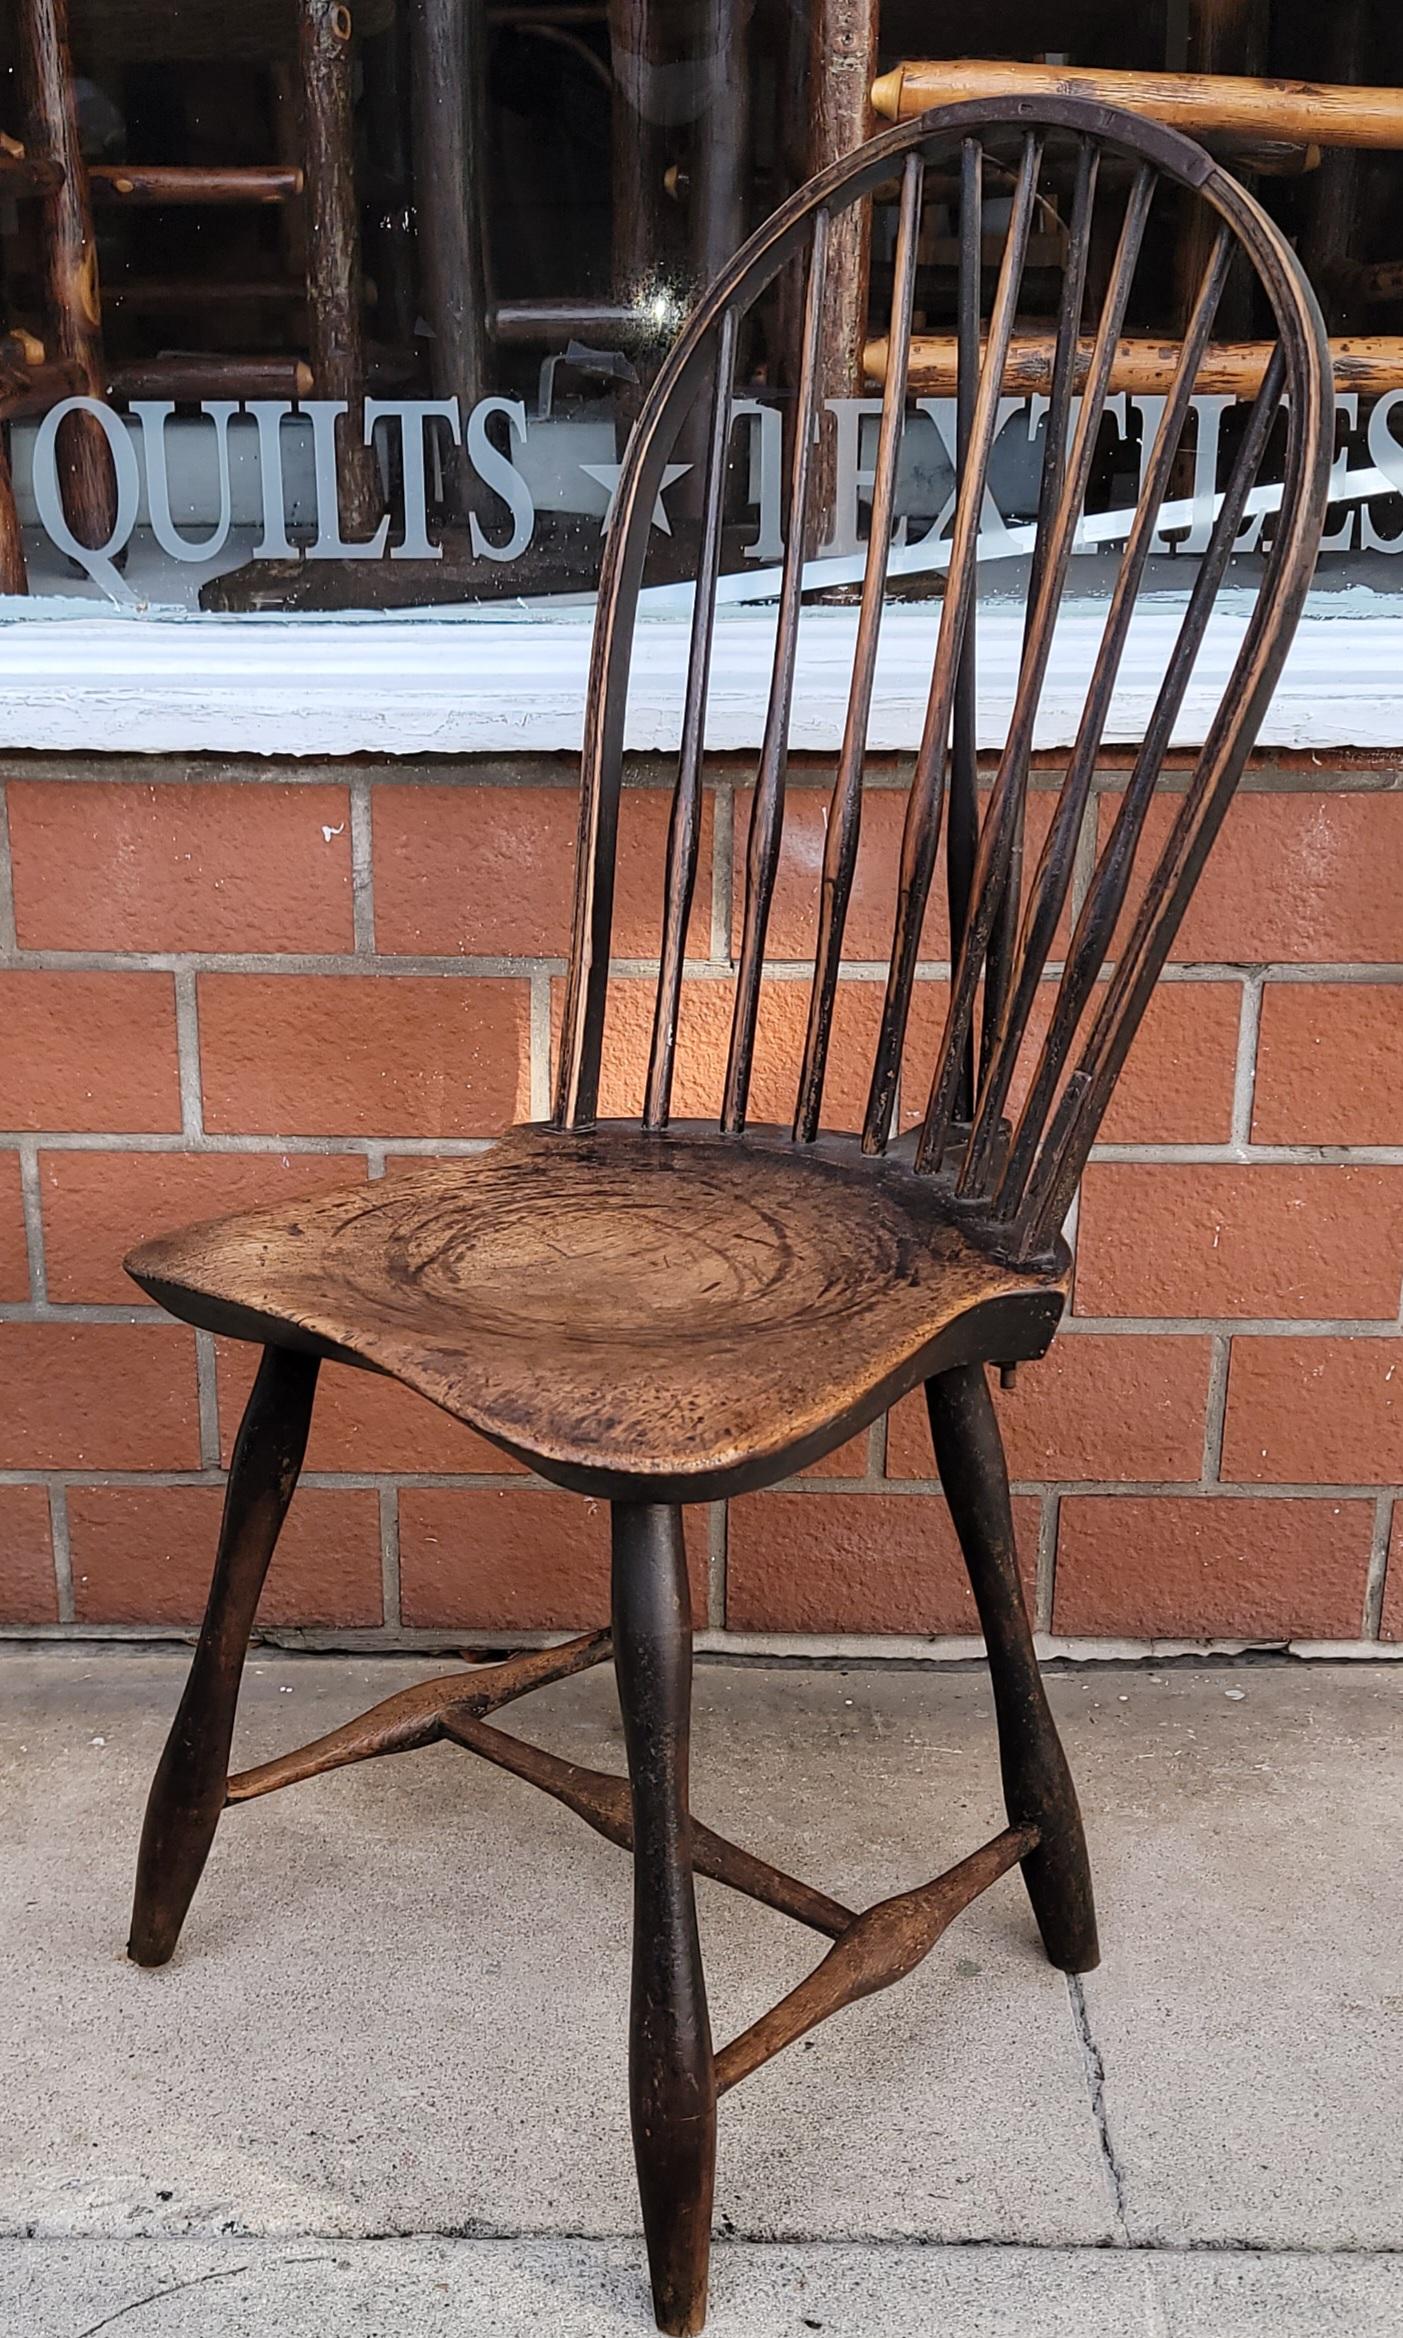 18Thc Original aged surface New England balloon back Windsor chairs in fantastic condition.These chairs have such wonderful form and patina.The saddle seats are most unusual and wonderful shape.These chairs have the most wonderful undisturbed